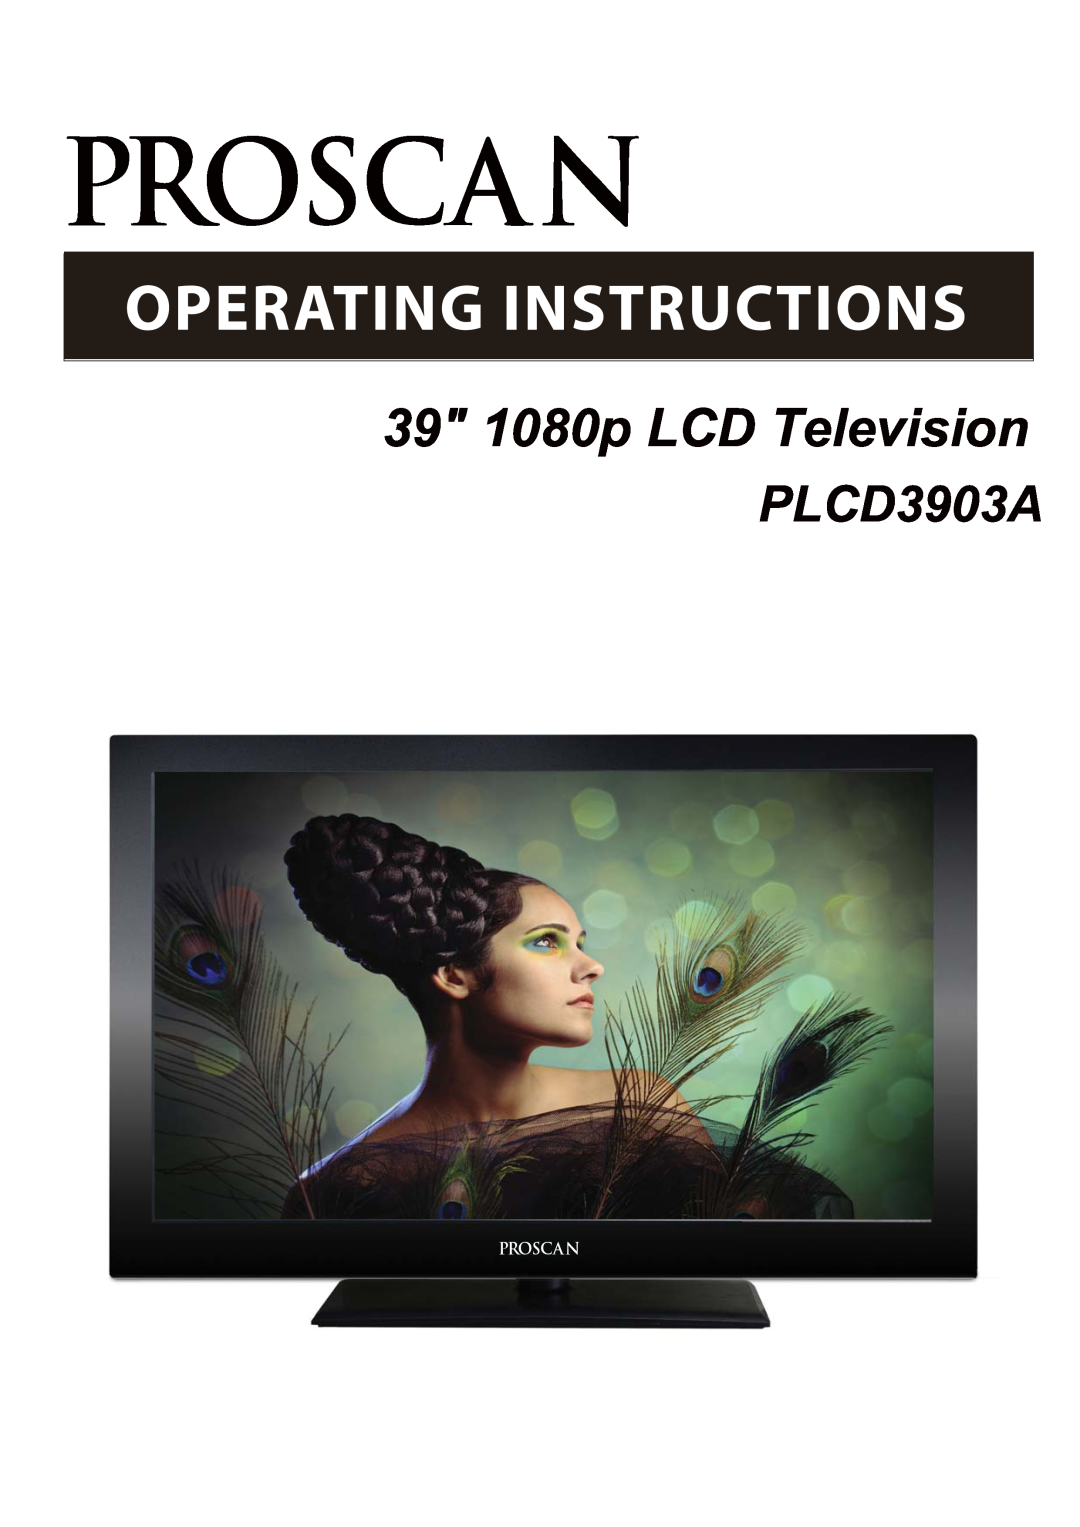 ProScan PLCD3903A manual Pro S Ca N, 39 1080p LCD Television, Pro Sca N 